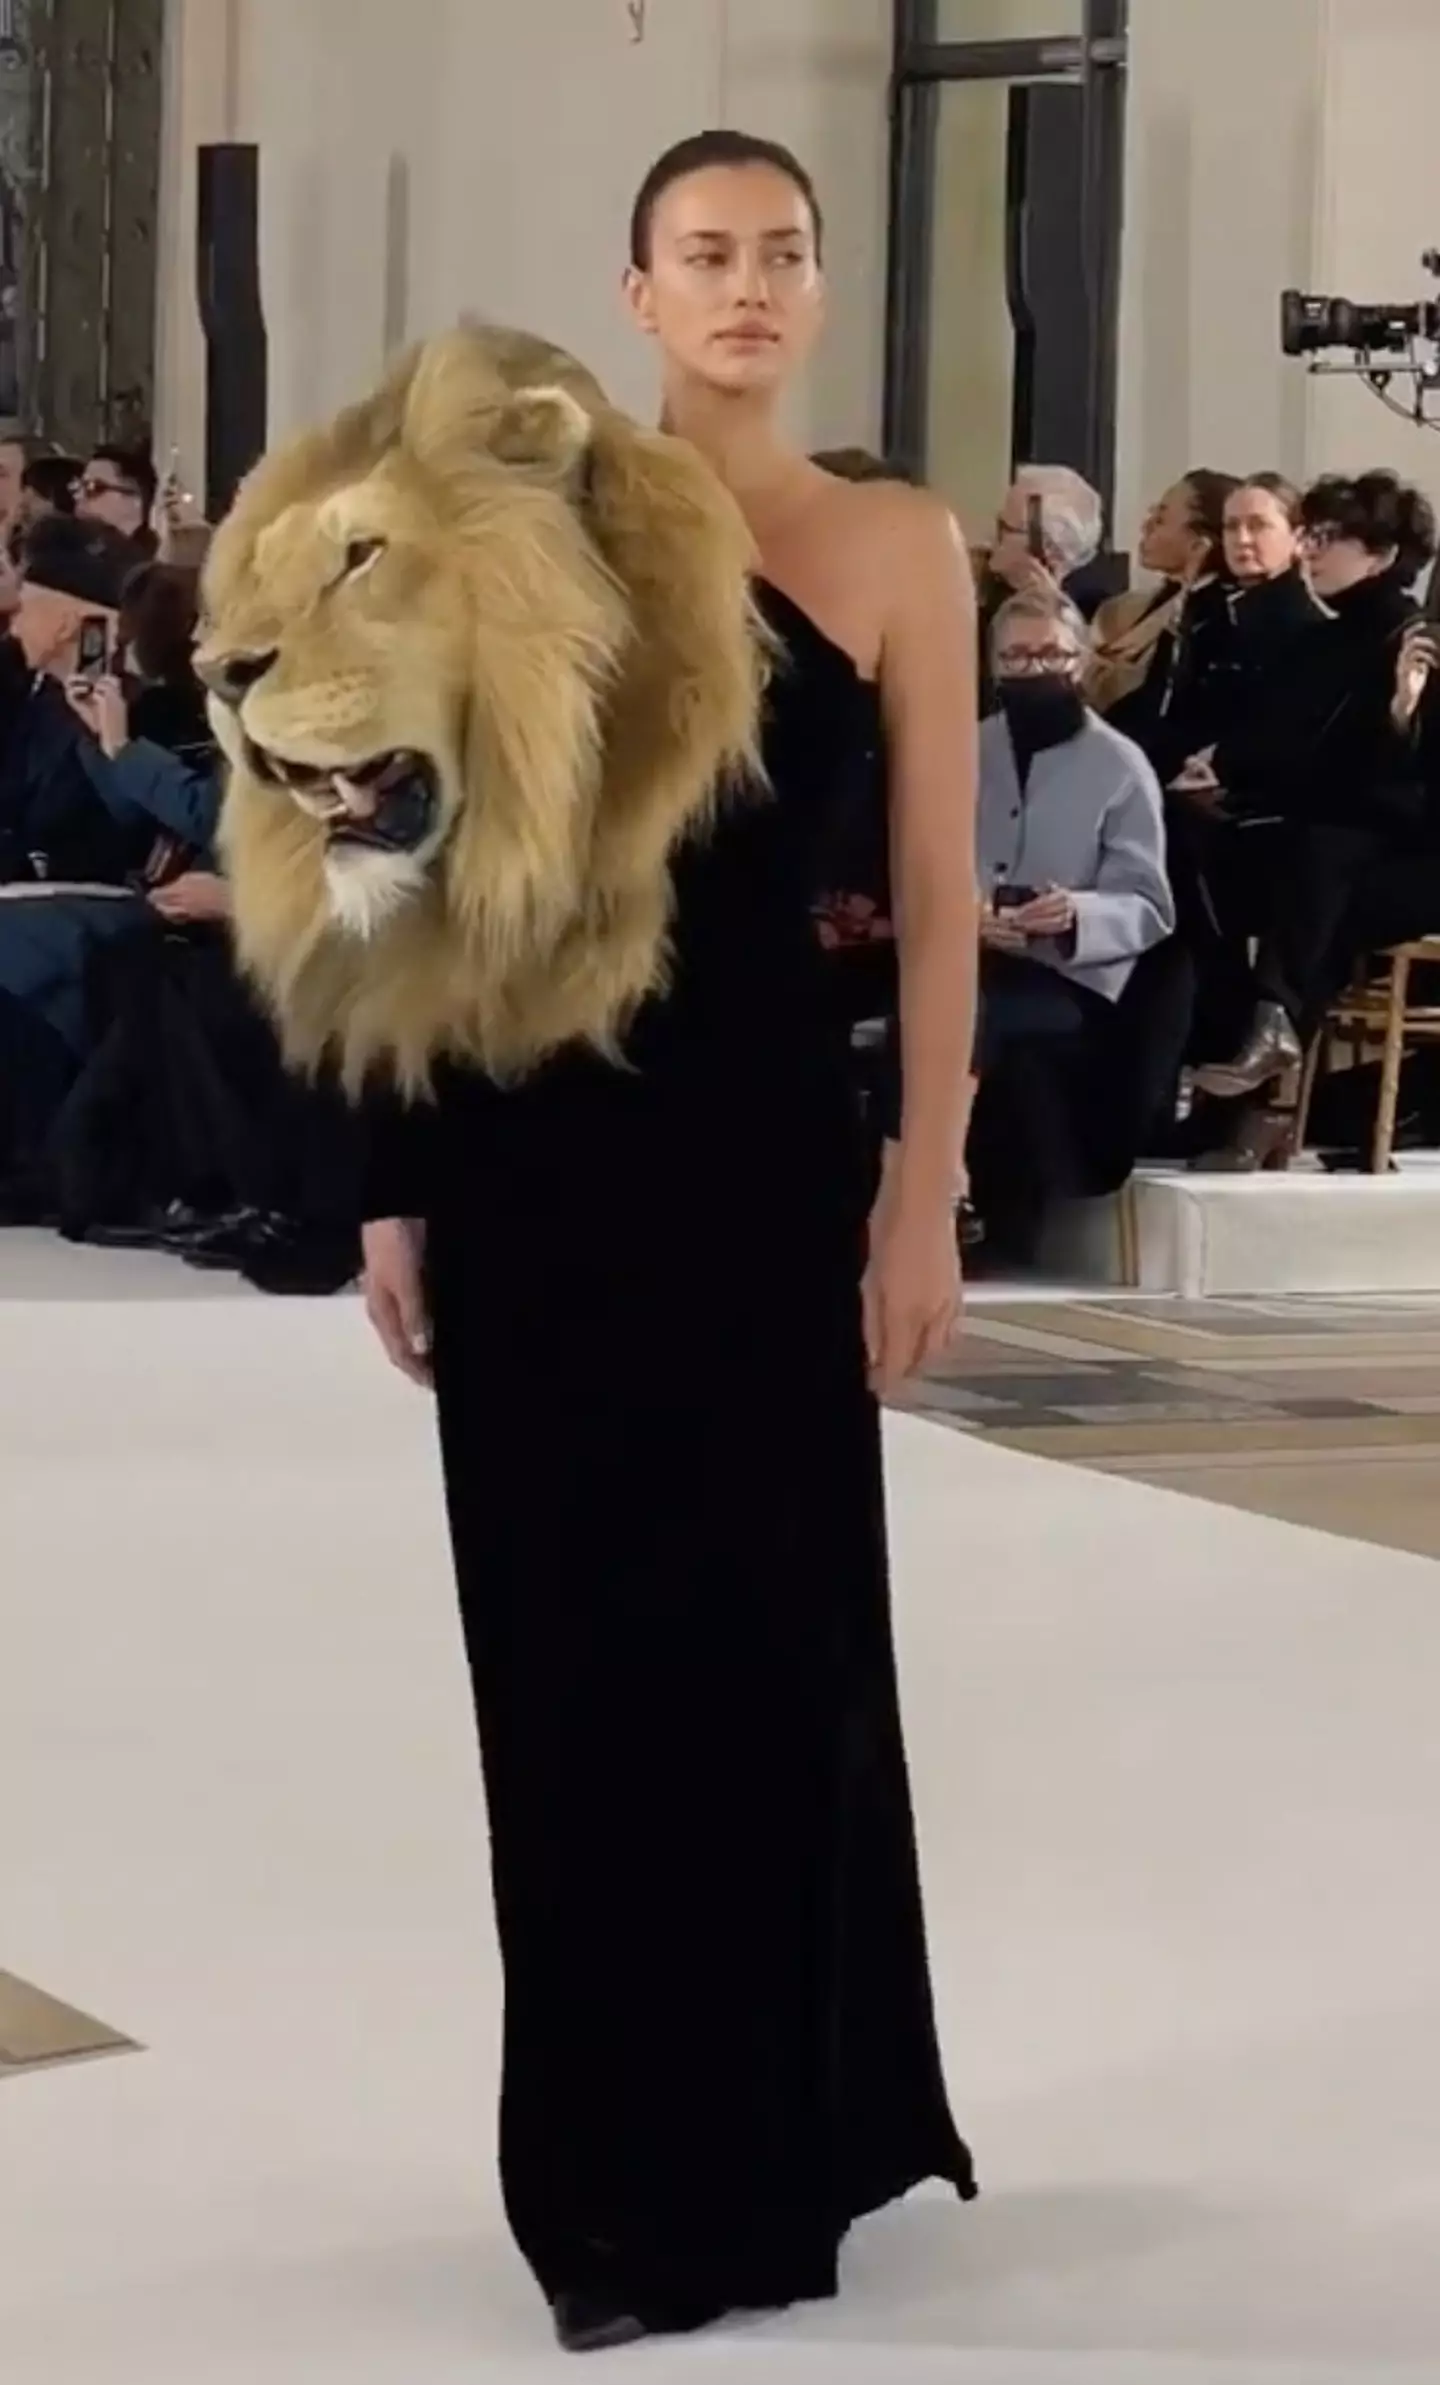 37-year-old Irina Shayk wearing a couture black gown fitted with an embroidered lion head for the Schiaparelli show.